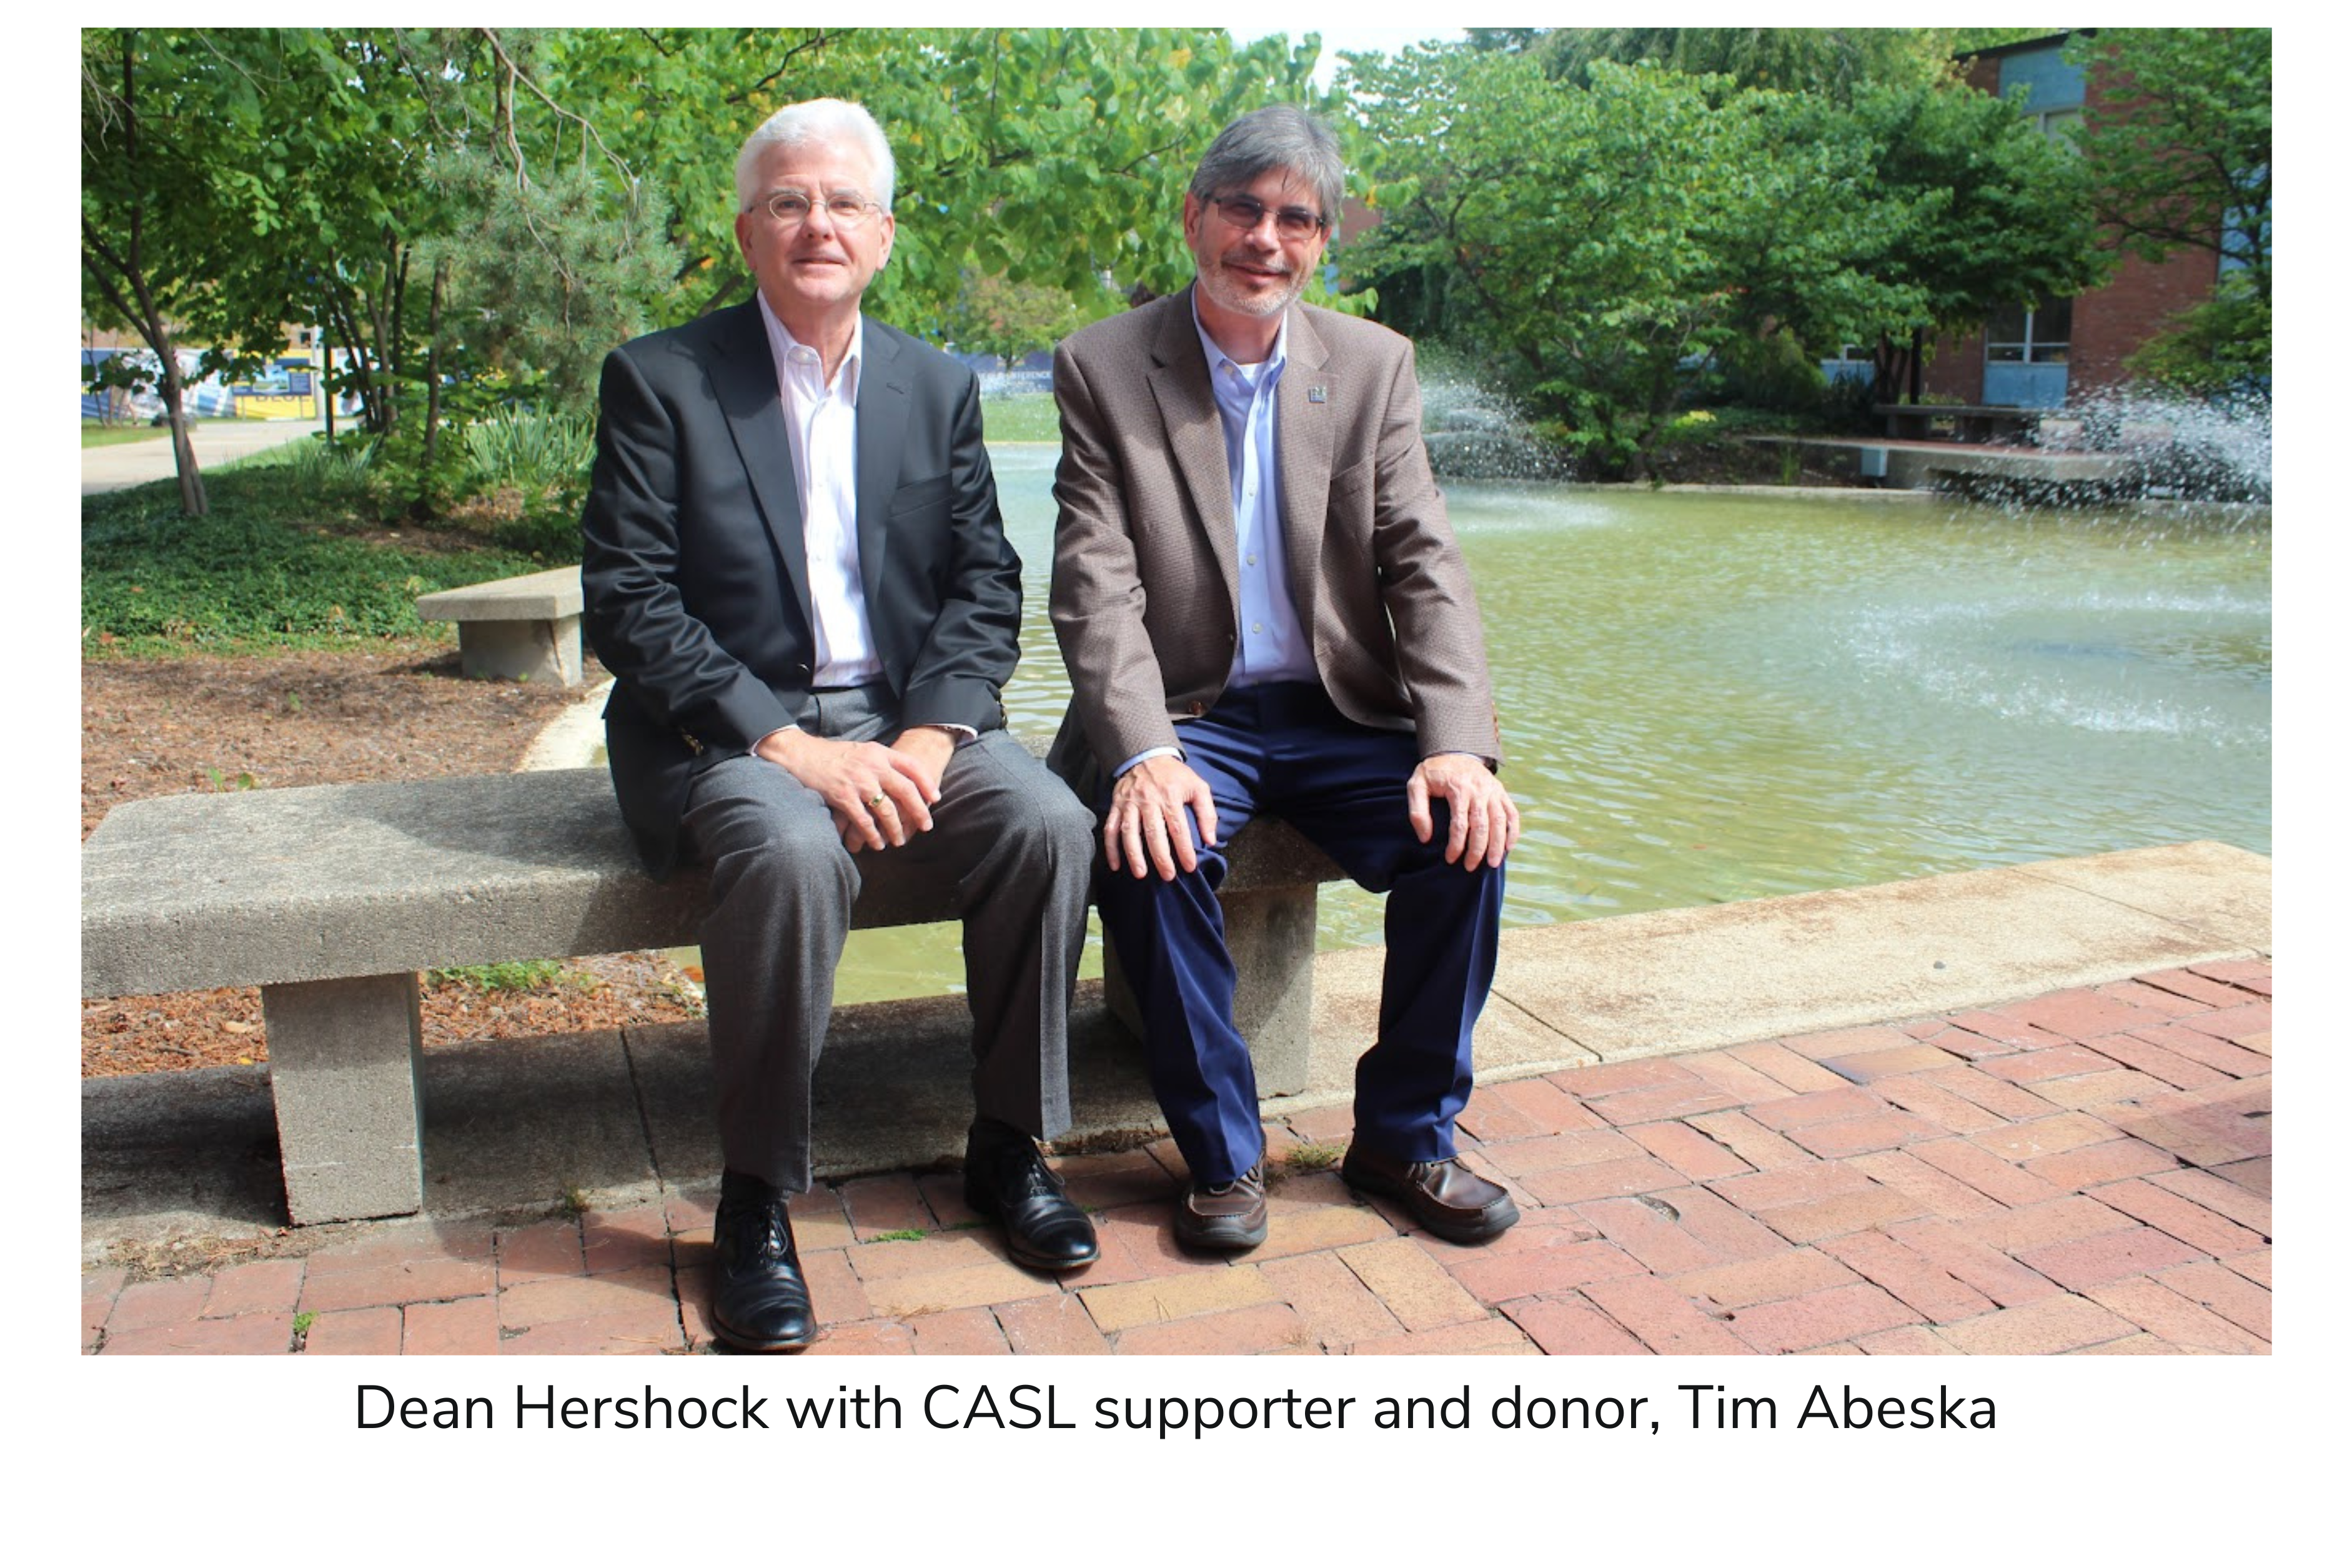 Dean Hershock with CASL supporter and donor, Tim Abeska